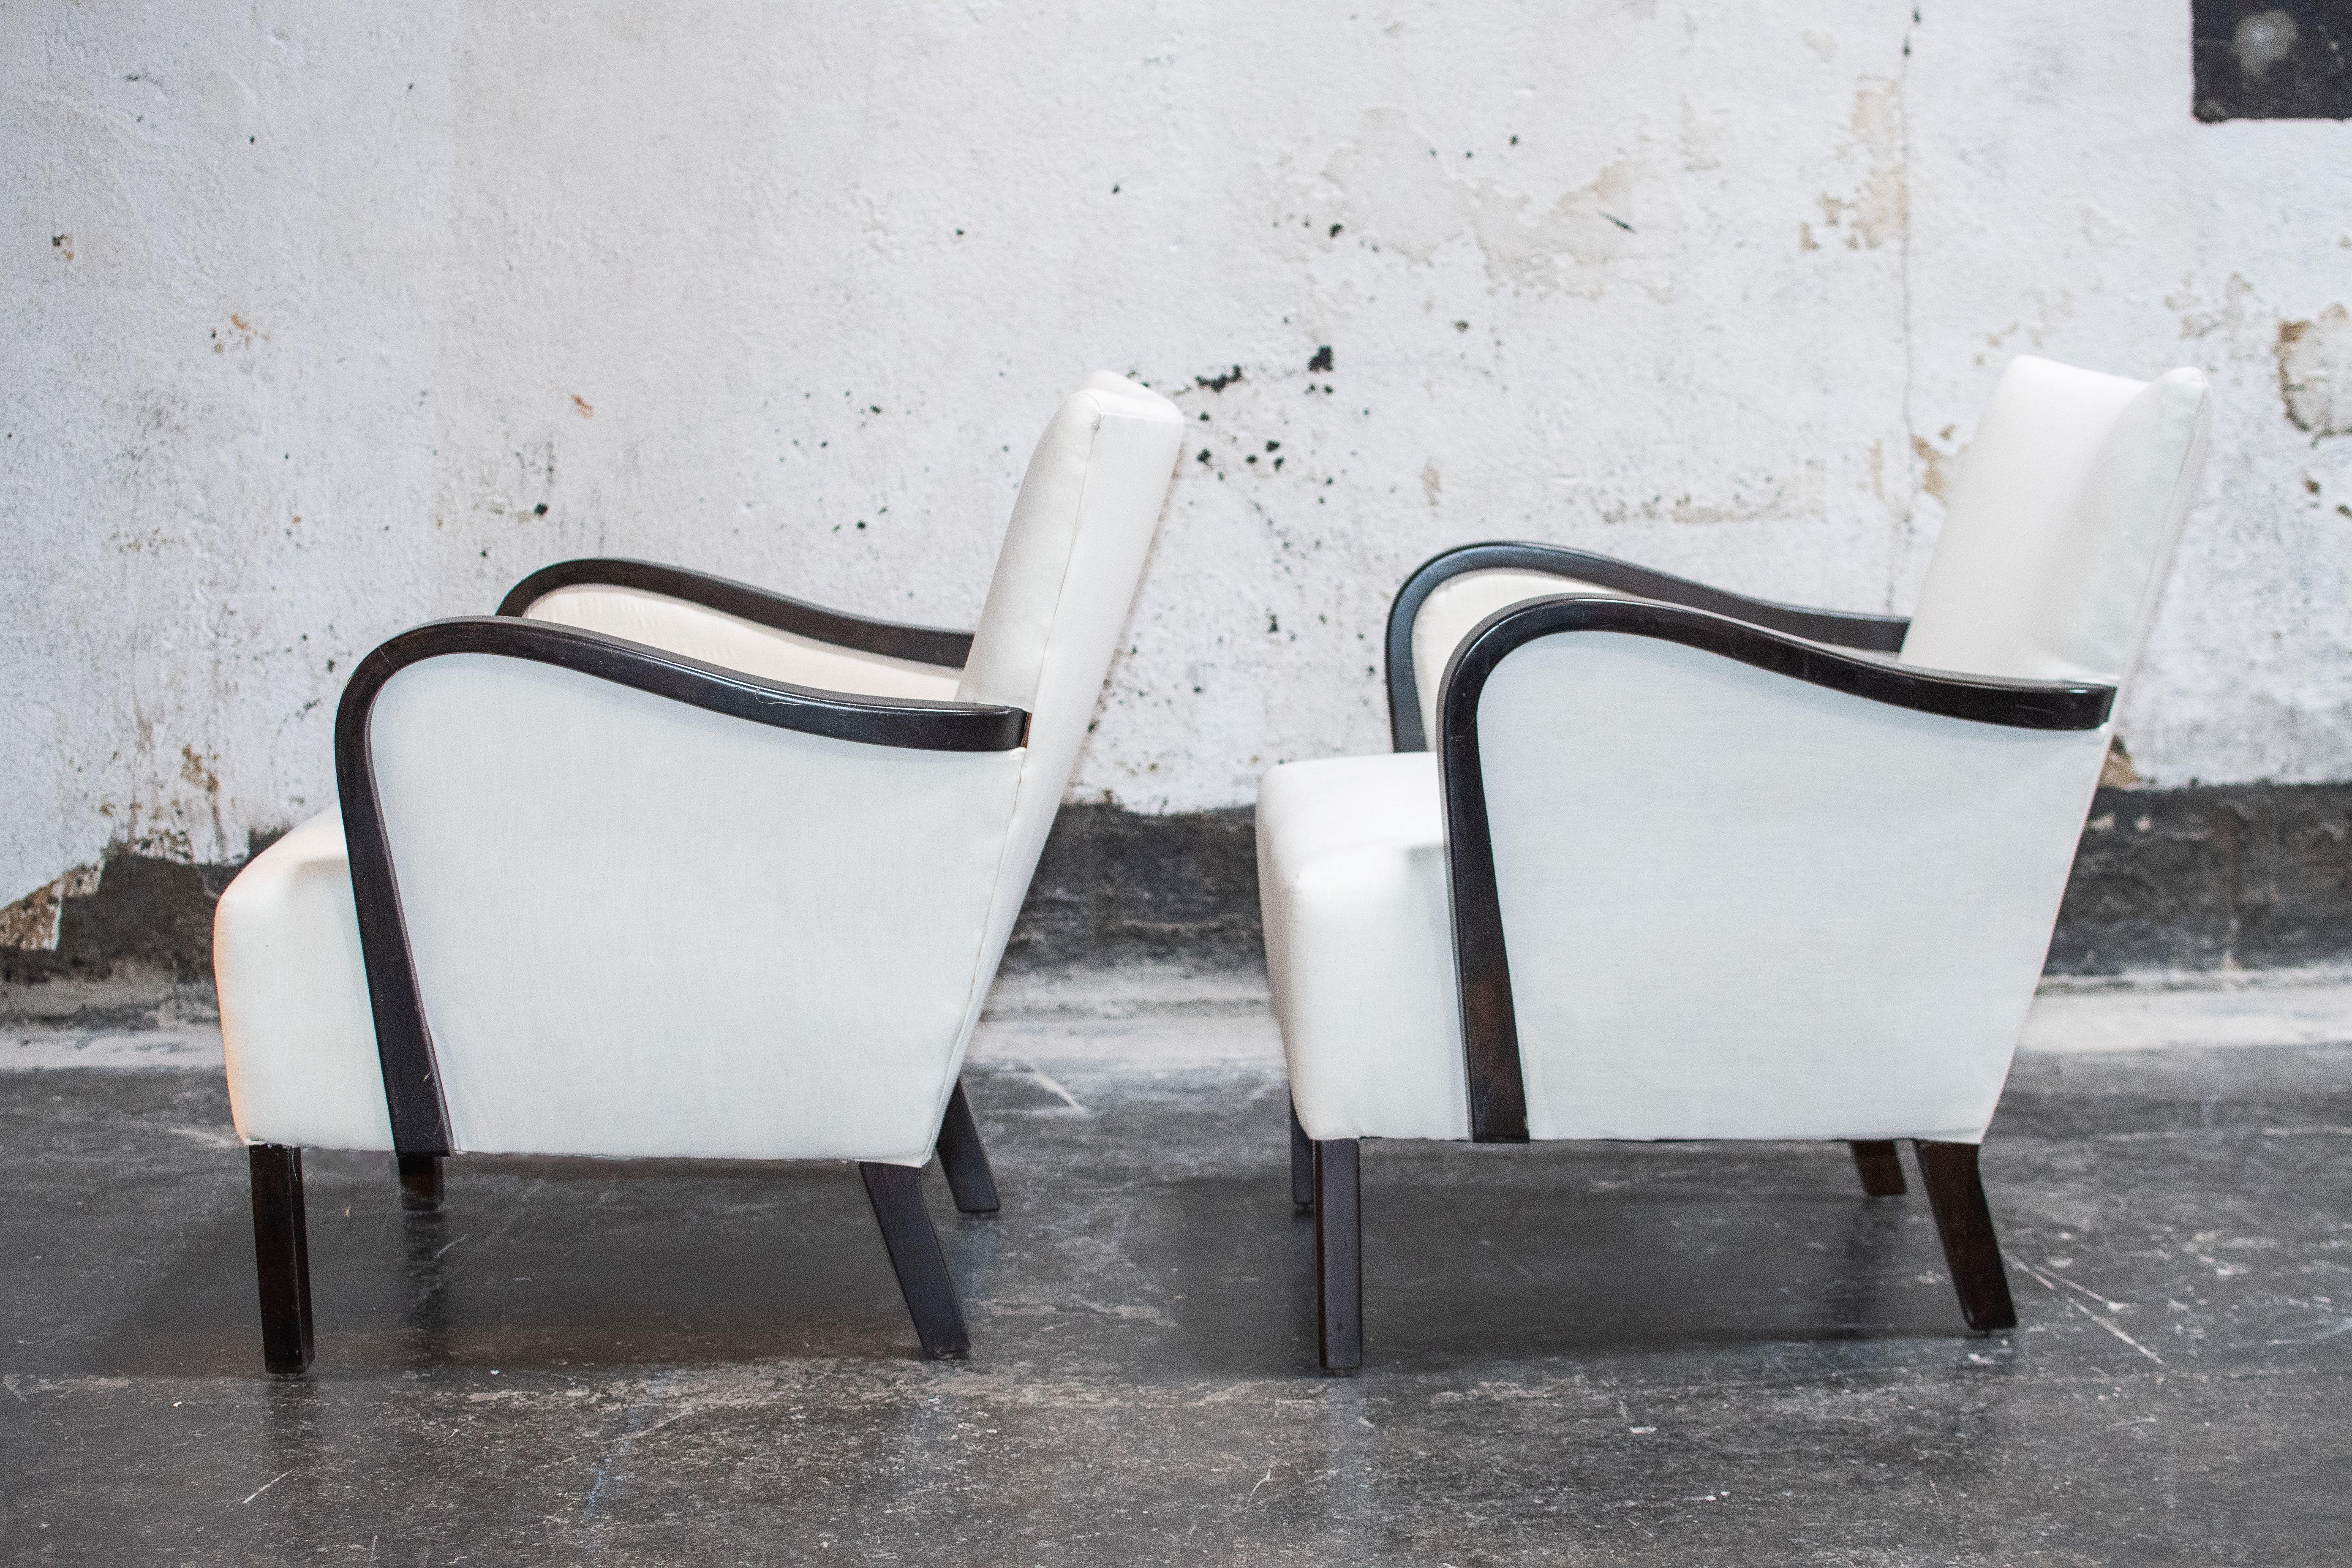 Pair of newly restored Swedish Art Moderne Arm chairs. Scandinavian interiors often have very low ceilings to contain heat, seating tends to be diminutive in footprint  but is deceptively comfortable as a result of the seat depth and pitch. The